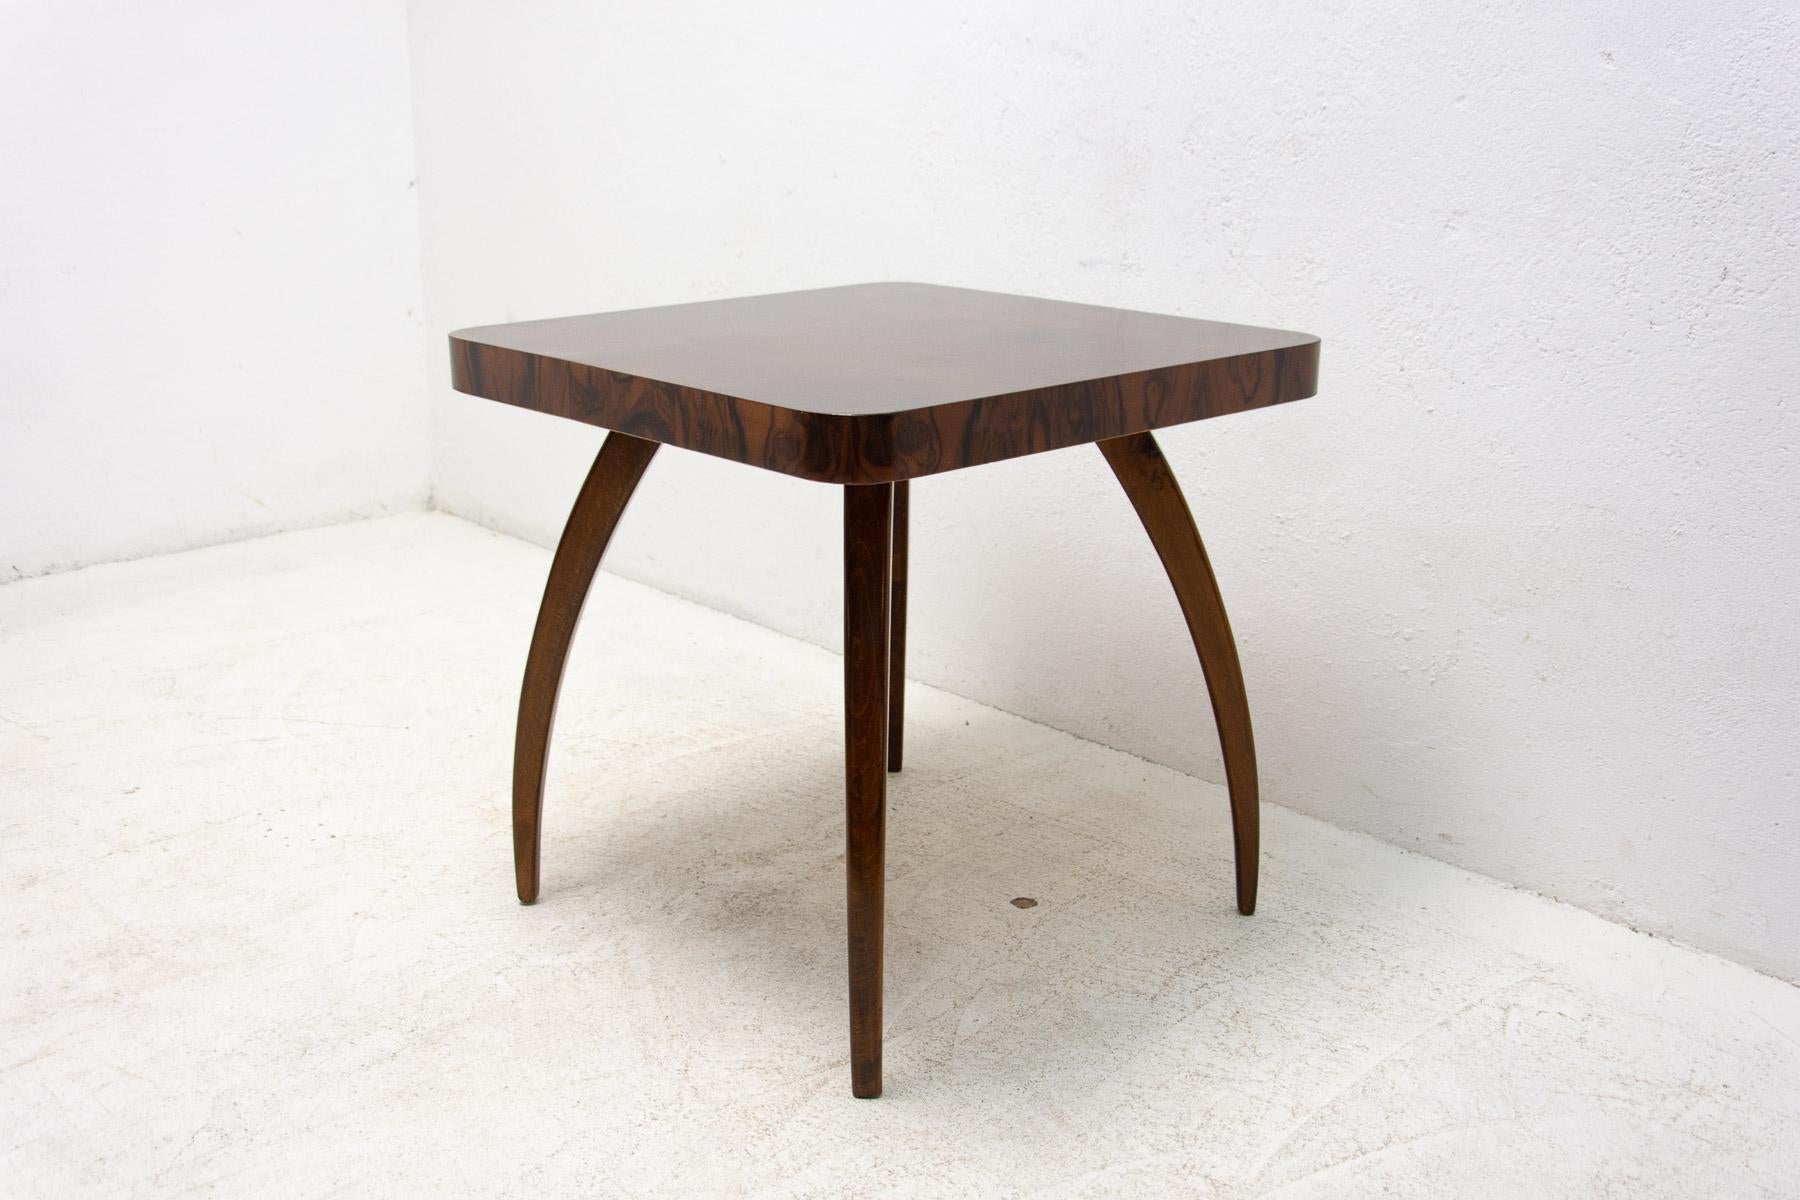 Square coffee table in the shape of spider designed by Jindrich Halabala, with distinctive curved legs, rounded corners. Walnut wood. Made in the former Czechoslovakia in the 1950´s.

Construction of the table in very good condition. In excellent